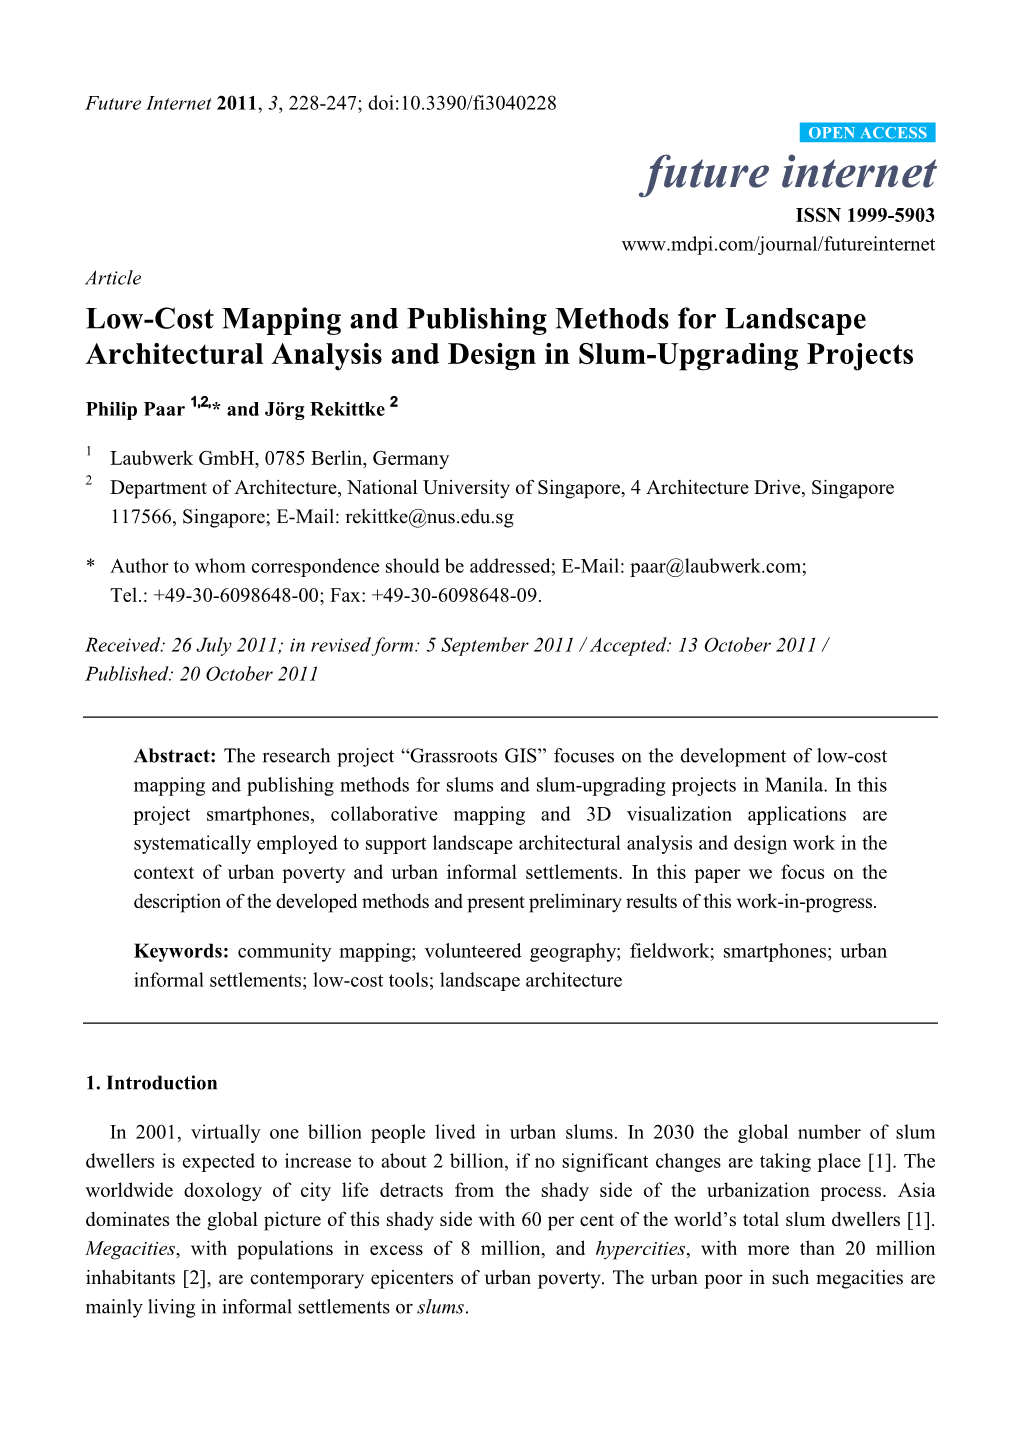 Low-Cost Mapping and Publishing Methods for Landscape Architectural Analysis and Design in Slum-Upgrading Projects